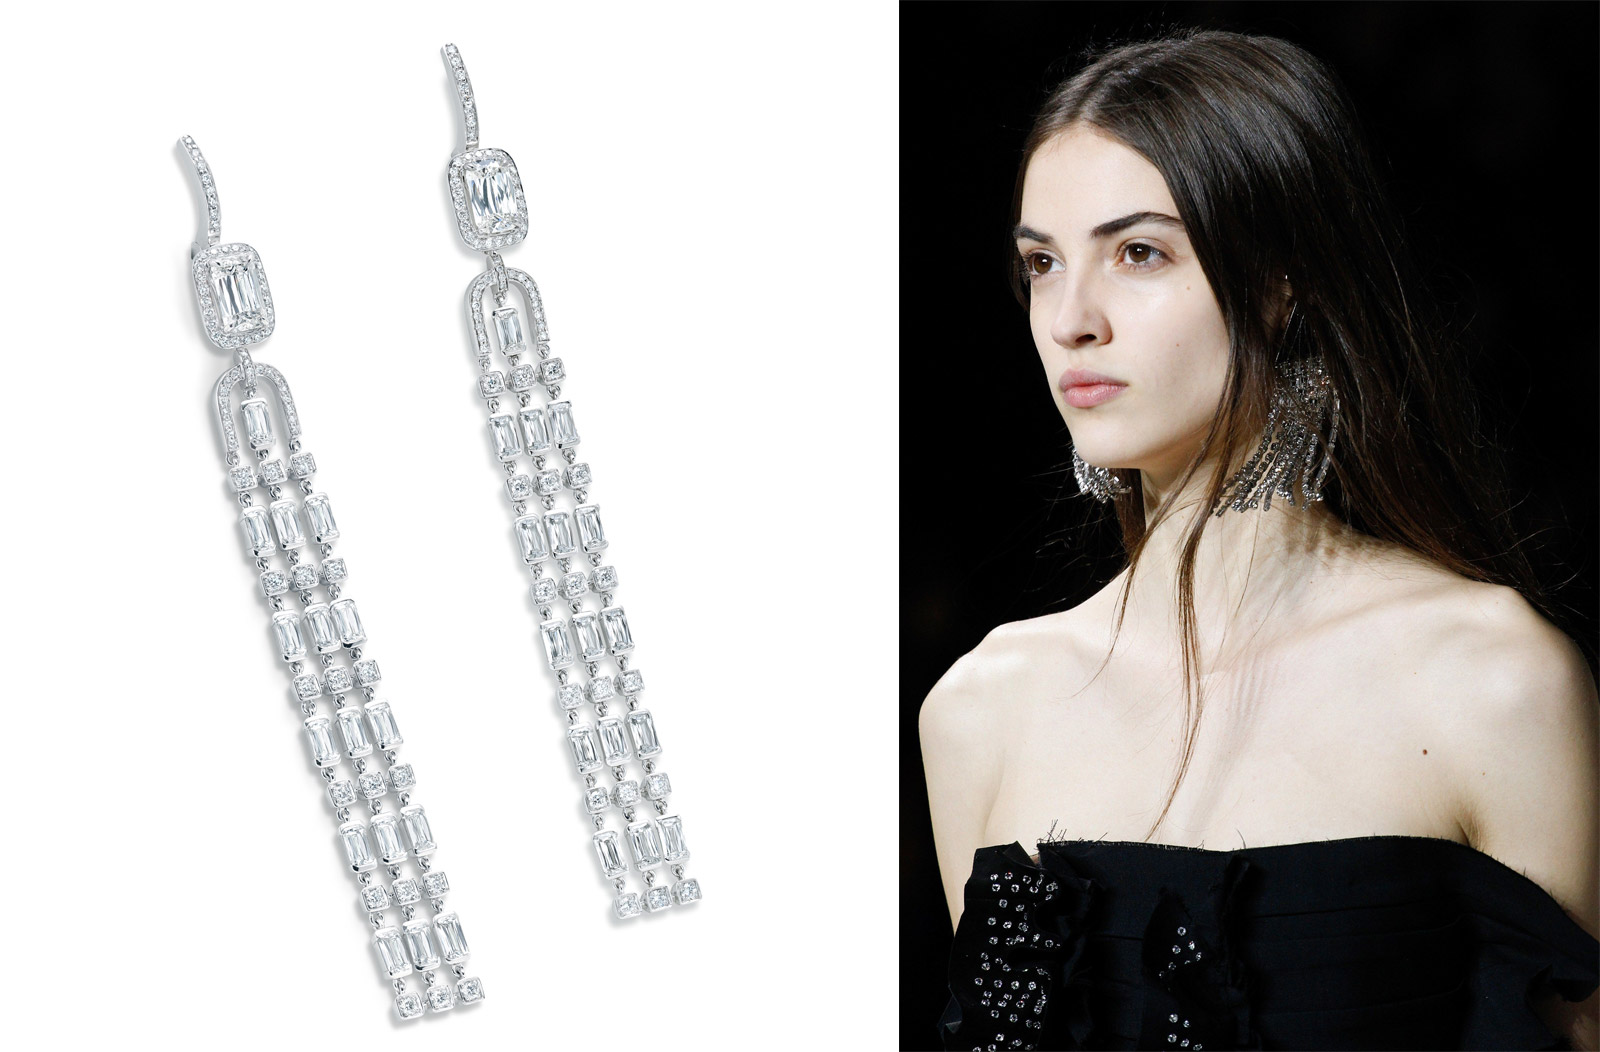 Boodles Ashoka diamond earrings from the Thrilliant collection